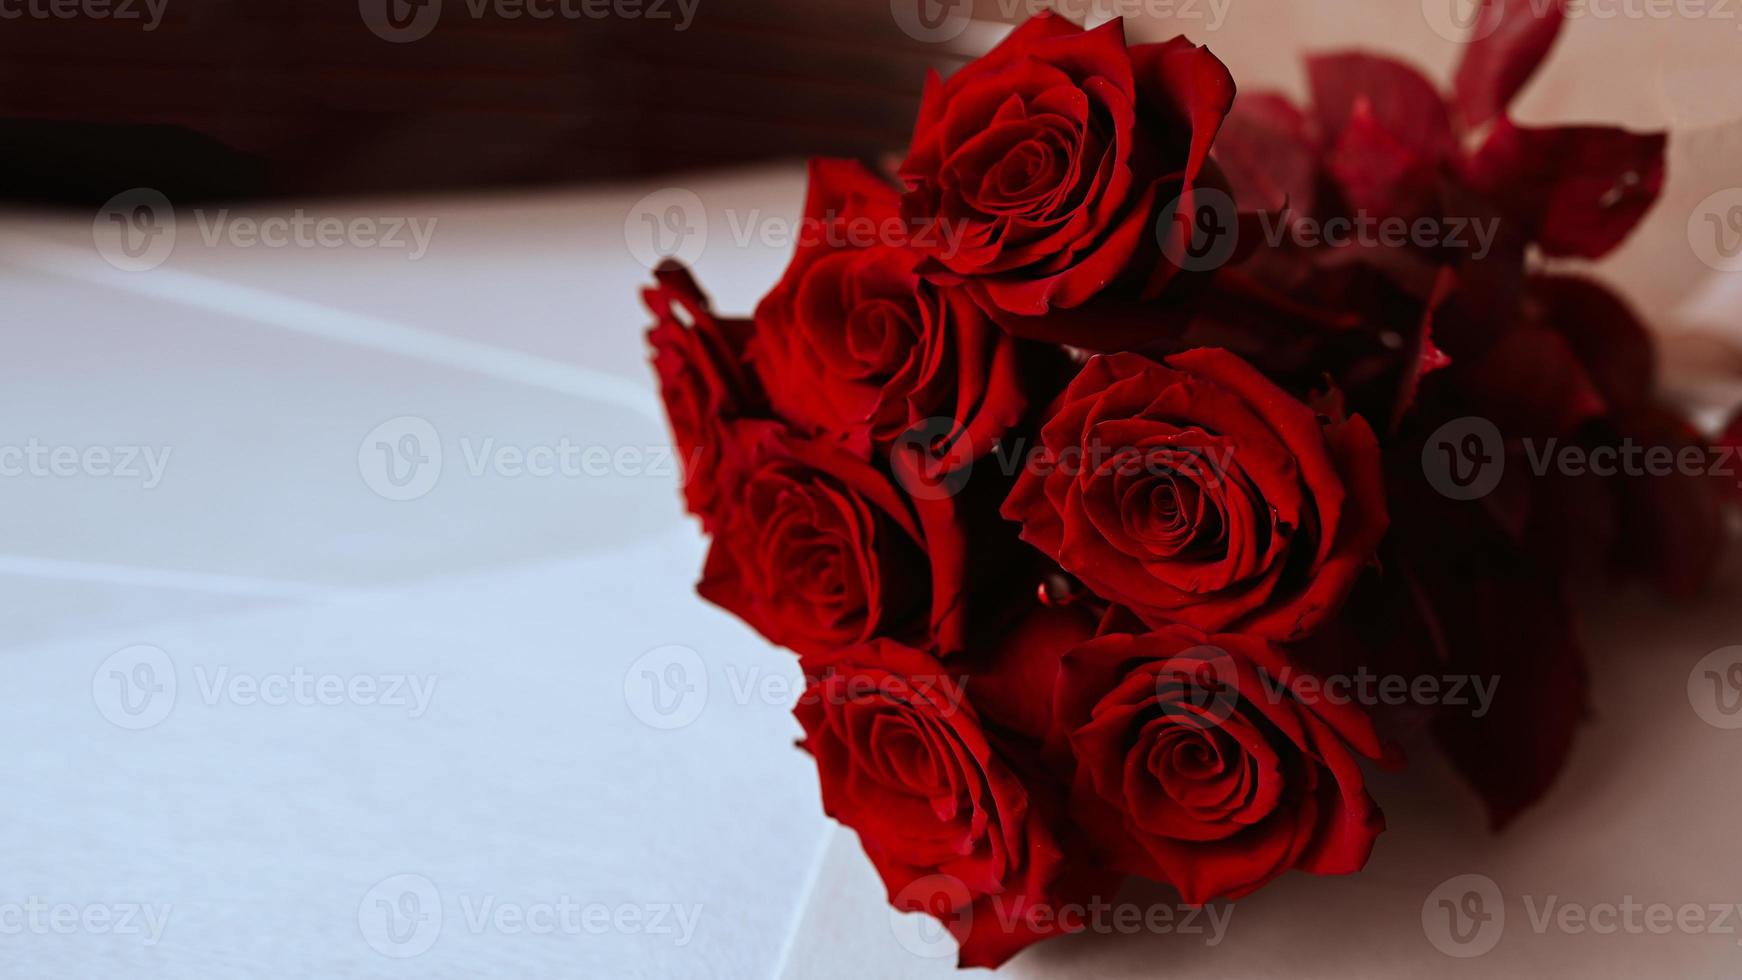 Wallpaper with red roses. Amazing background with red leaves for greeting card, invitation. Lots of red natural amazing roses. photo